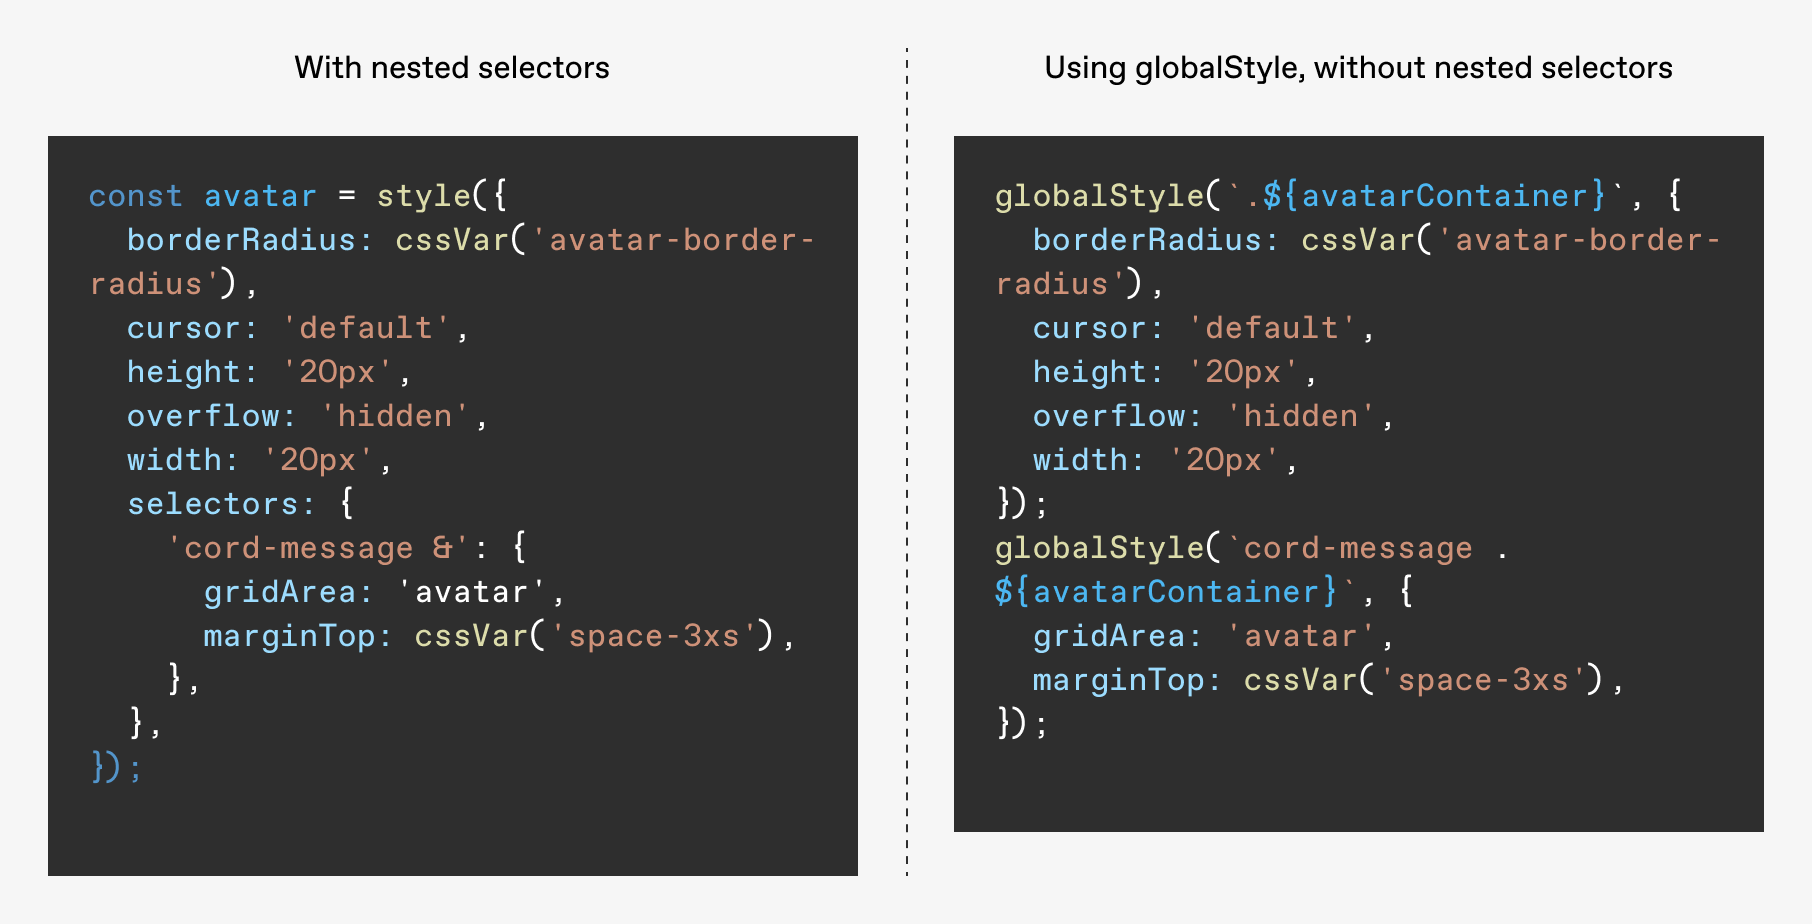 css code showing a comparison between nested selectors and using globalStyle, without nested selectors